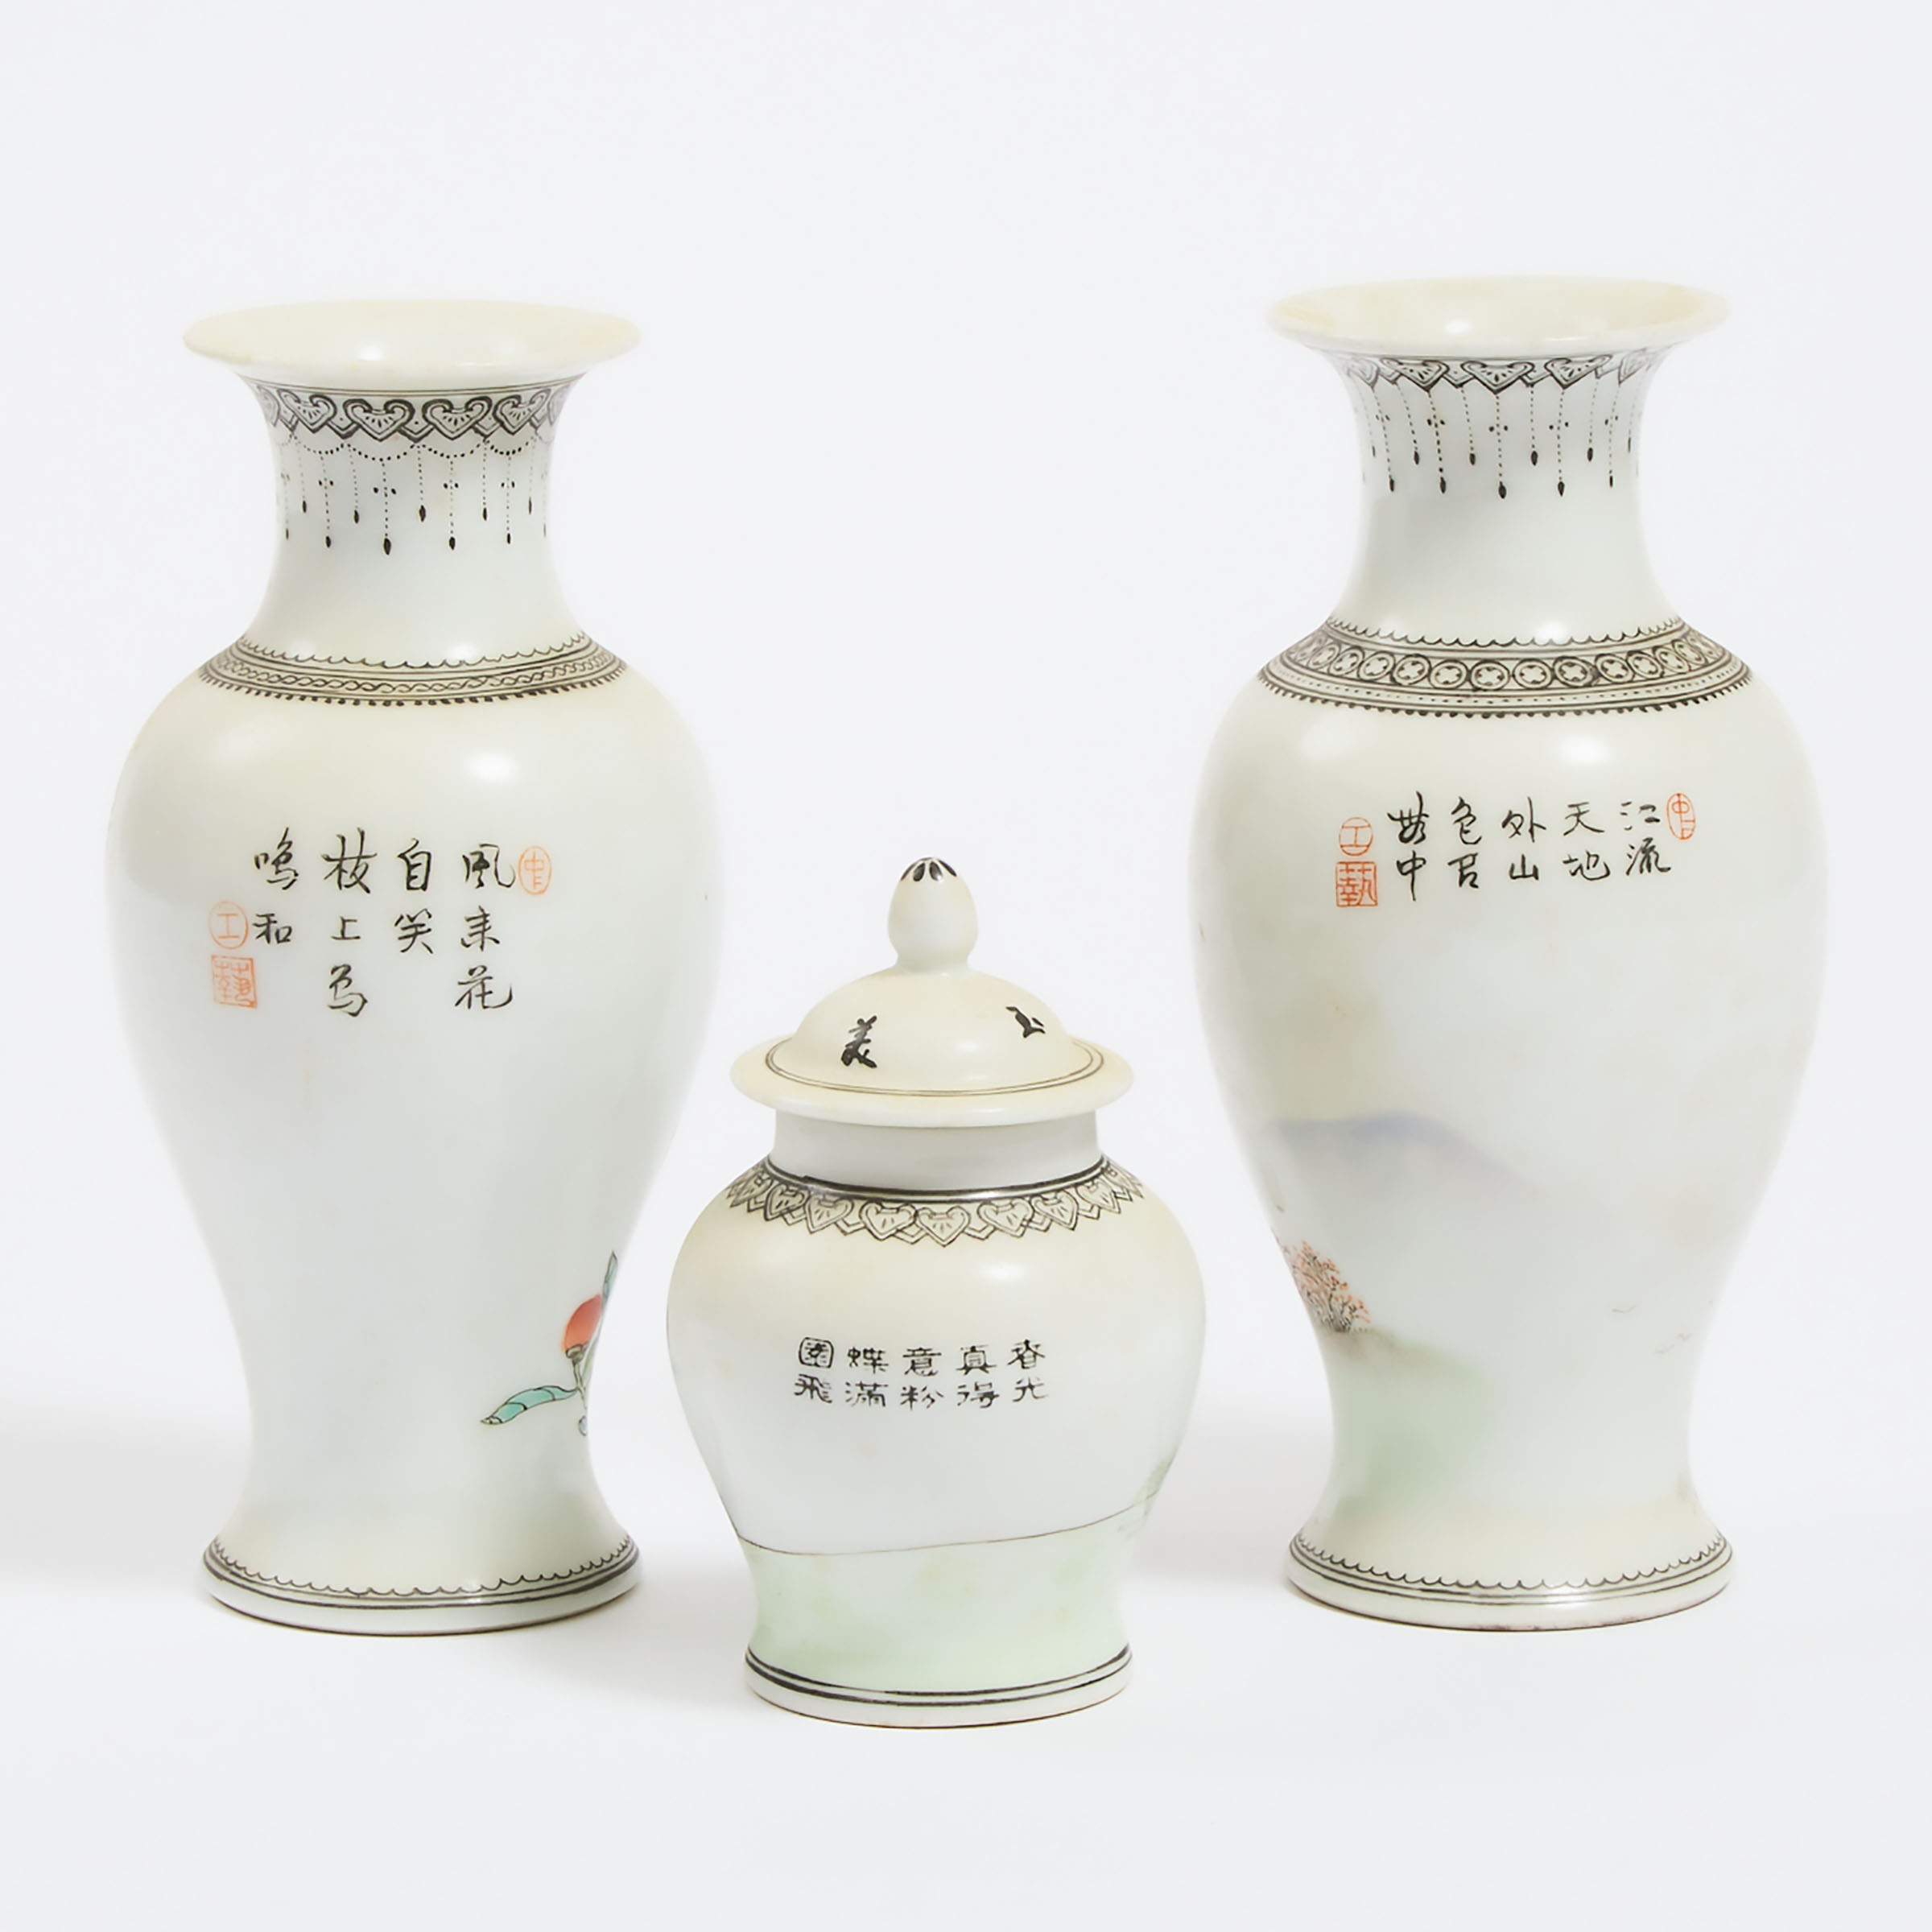 Two Small Grisaille and Enamel Porcelain Vases, Together With a Miniature Lidded Vase, Mid 20th Century